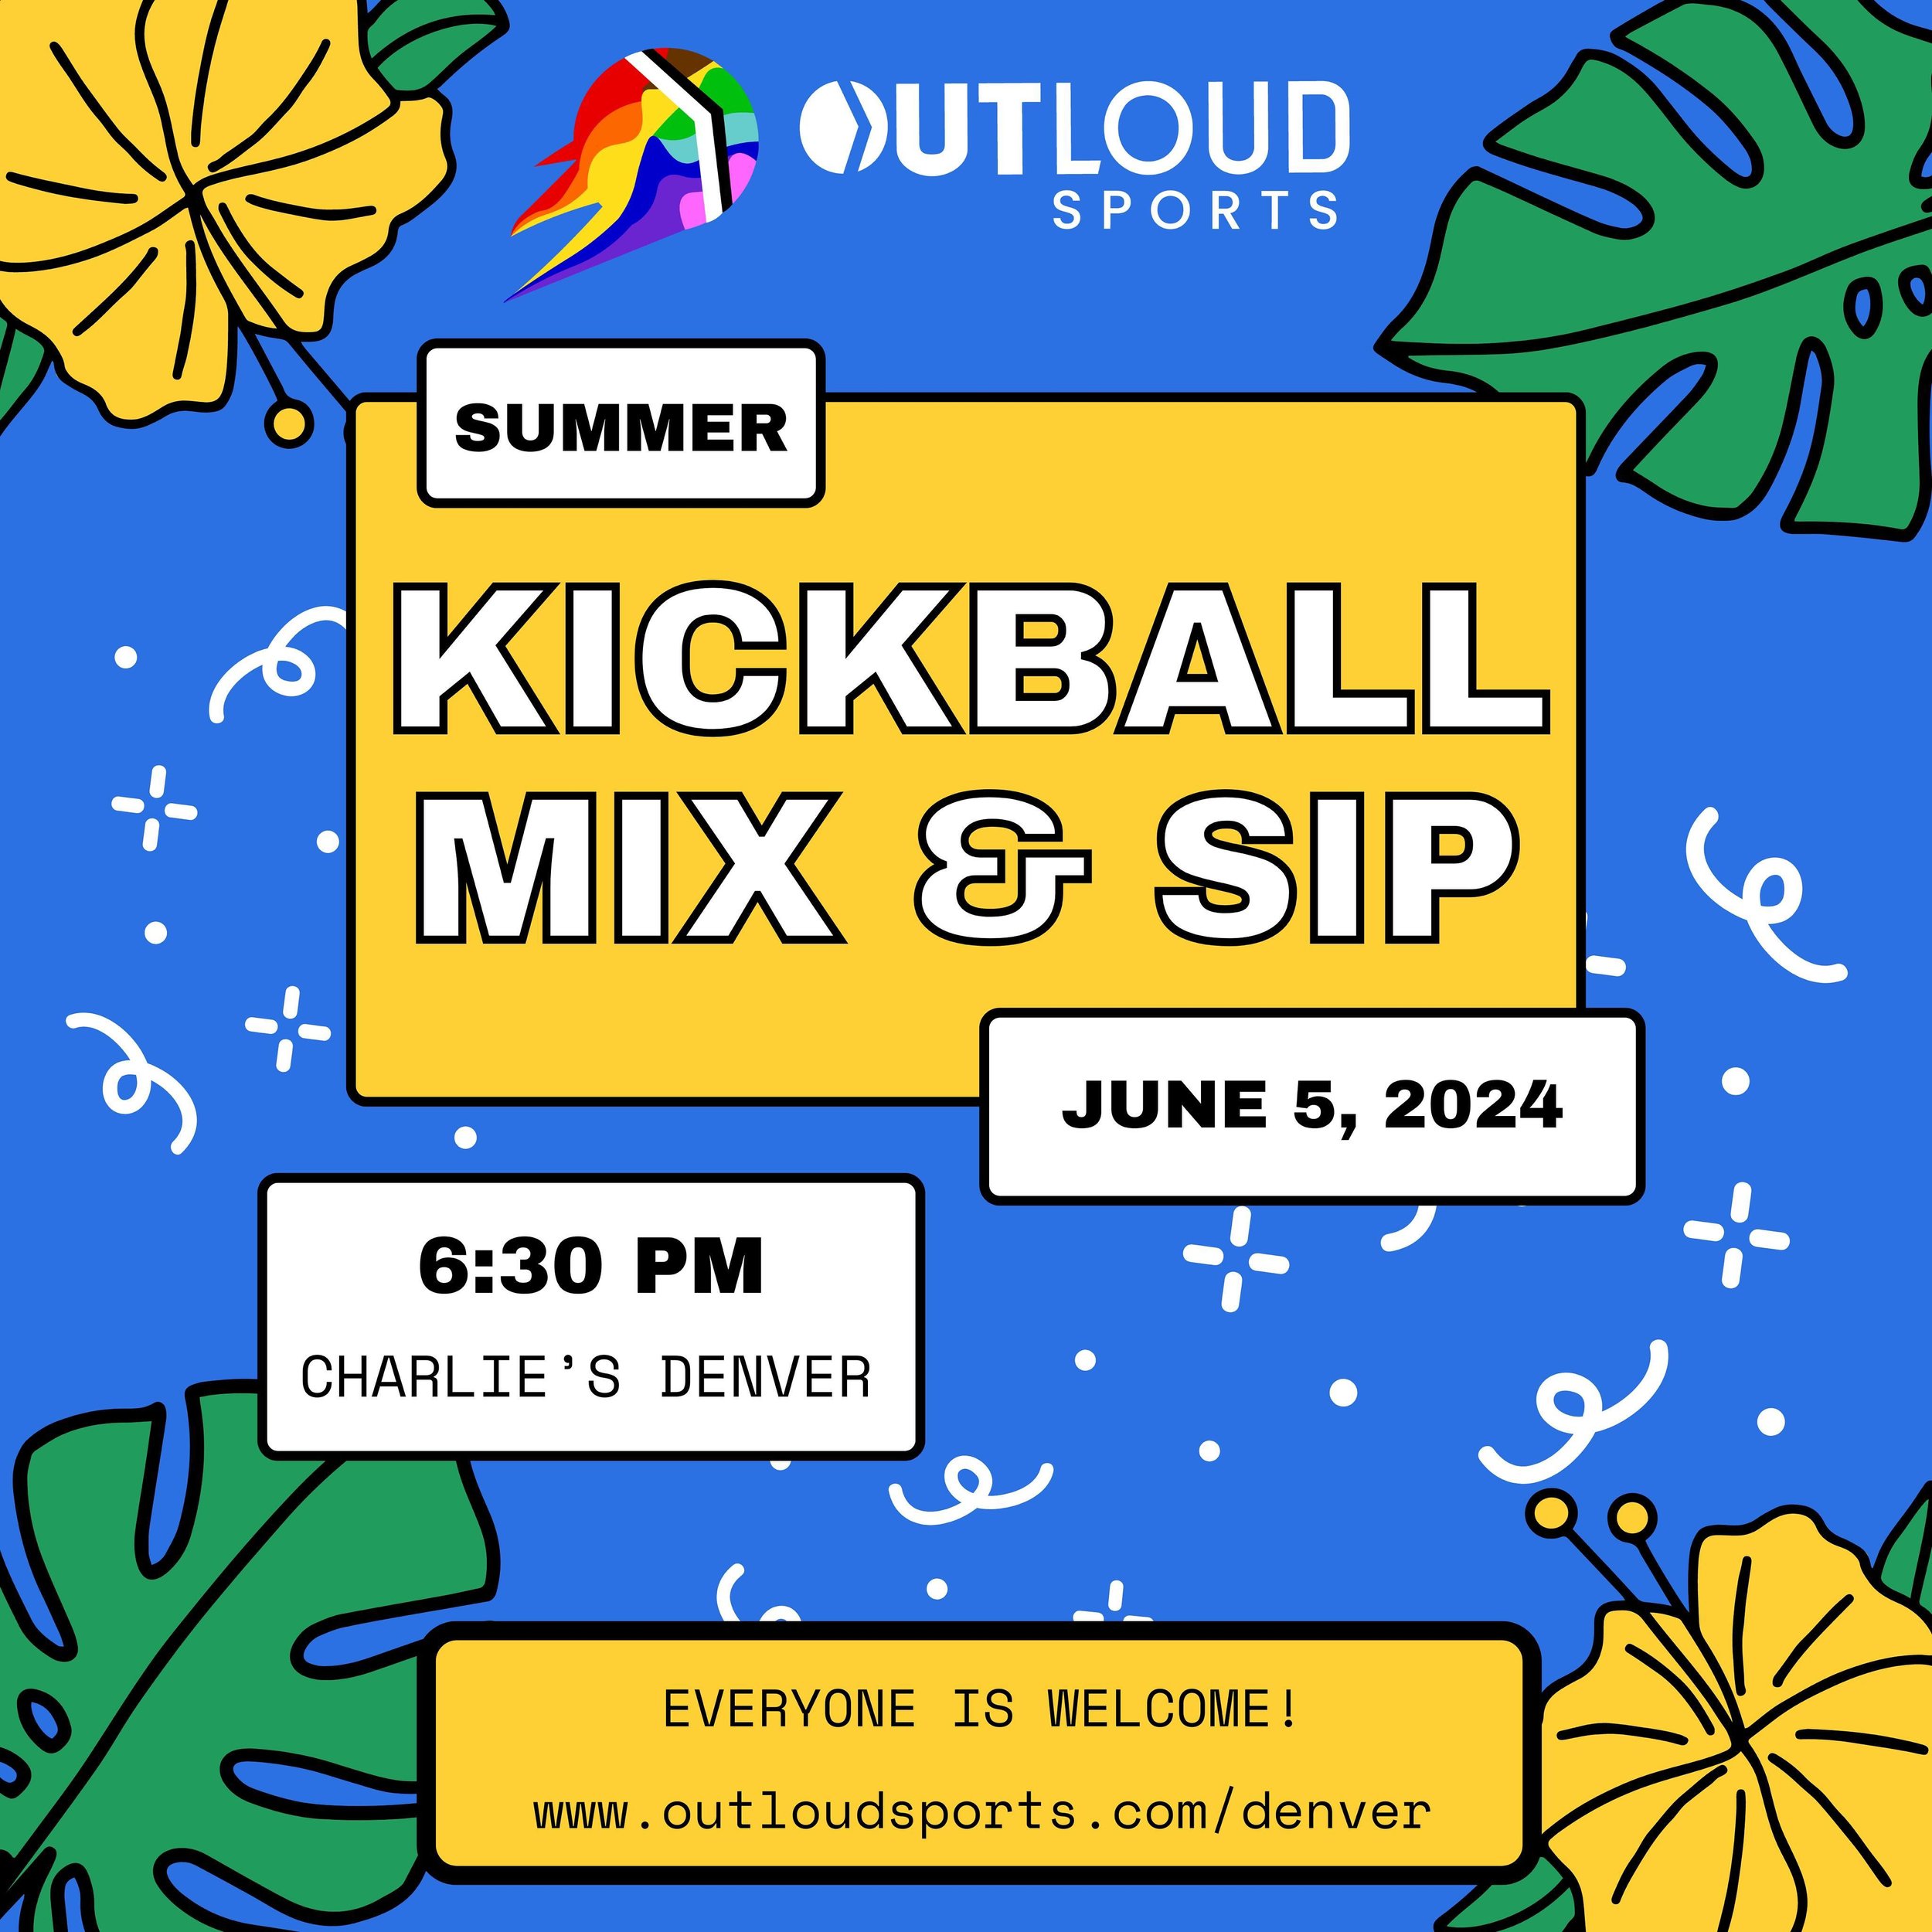 Summer kickball is just around the corner! ☀️ Join us at Charlie&rsquo;s Denver on the back patio and meet other players. 🍻 Not registered? No worries! Everyone is welcome. Bring a partner. Bring a friend. Either way, we can&rsquo;t wait to meet you